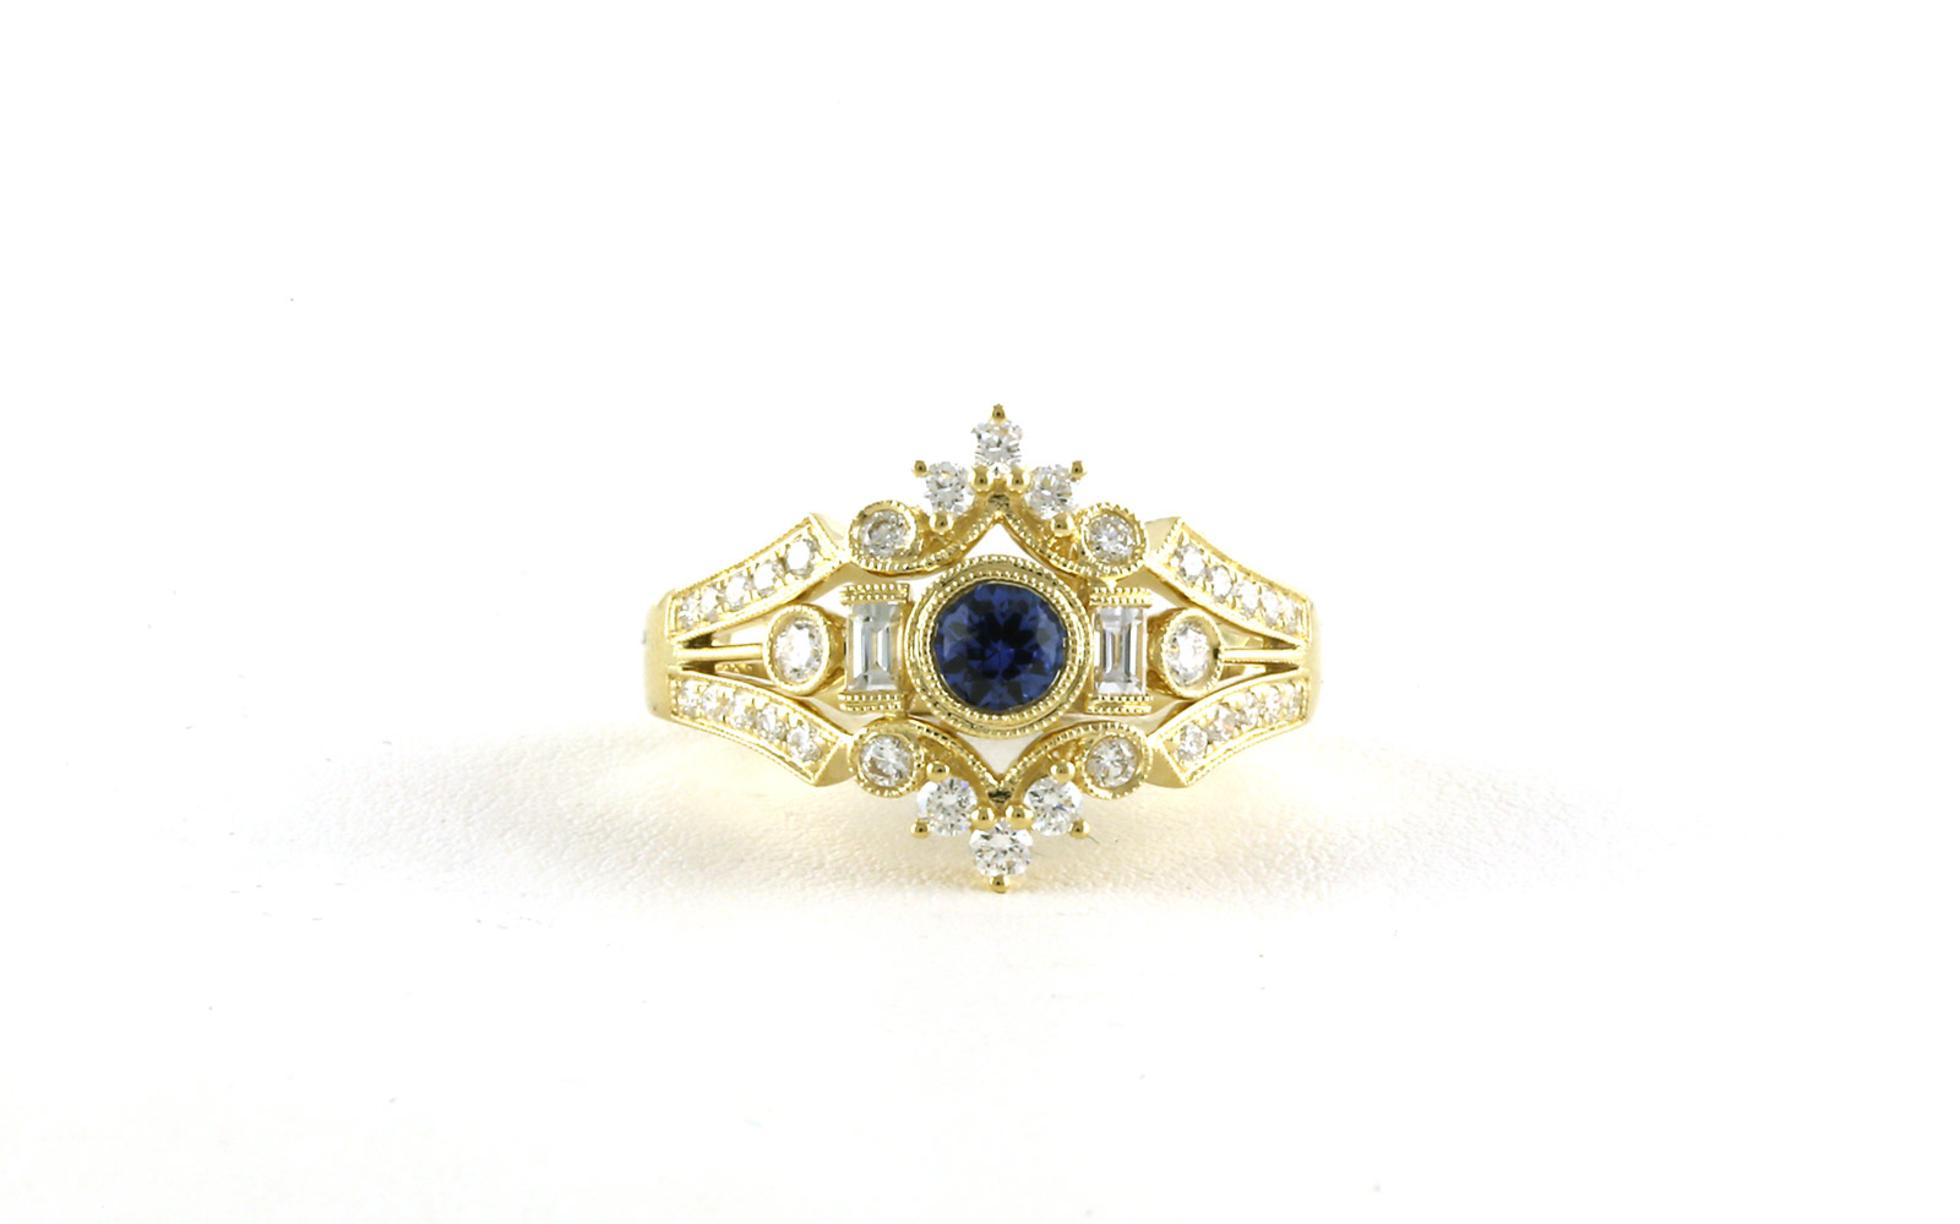 Vintage-style Halo Montana Yogo Sapphire and Diamond Ring in Yellow Gold (0.47cts TWT)